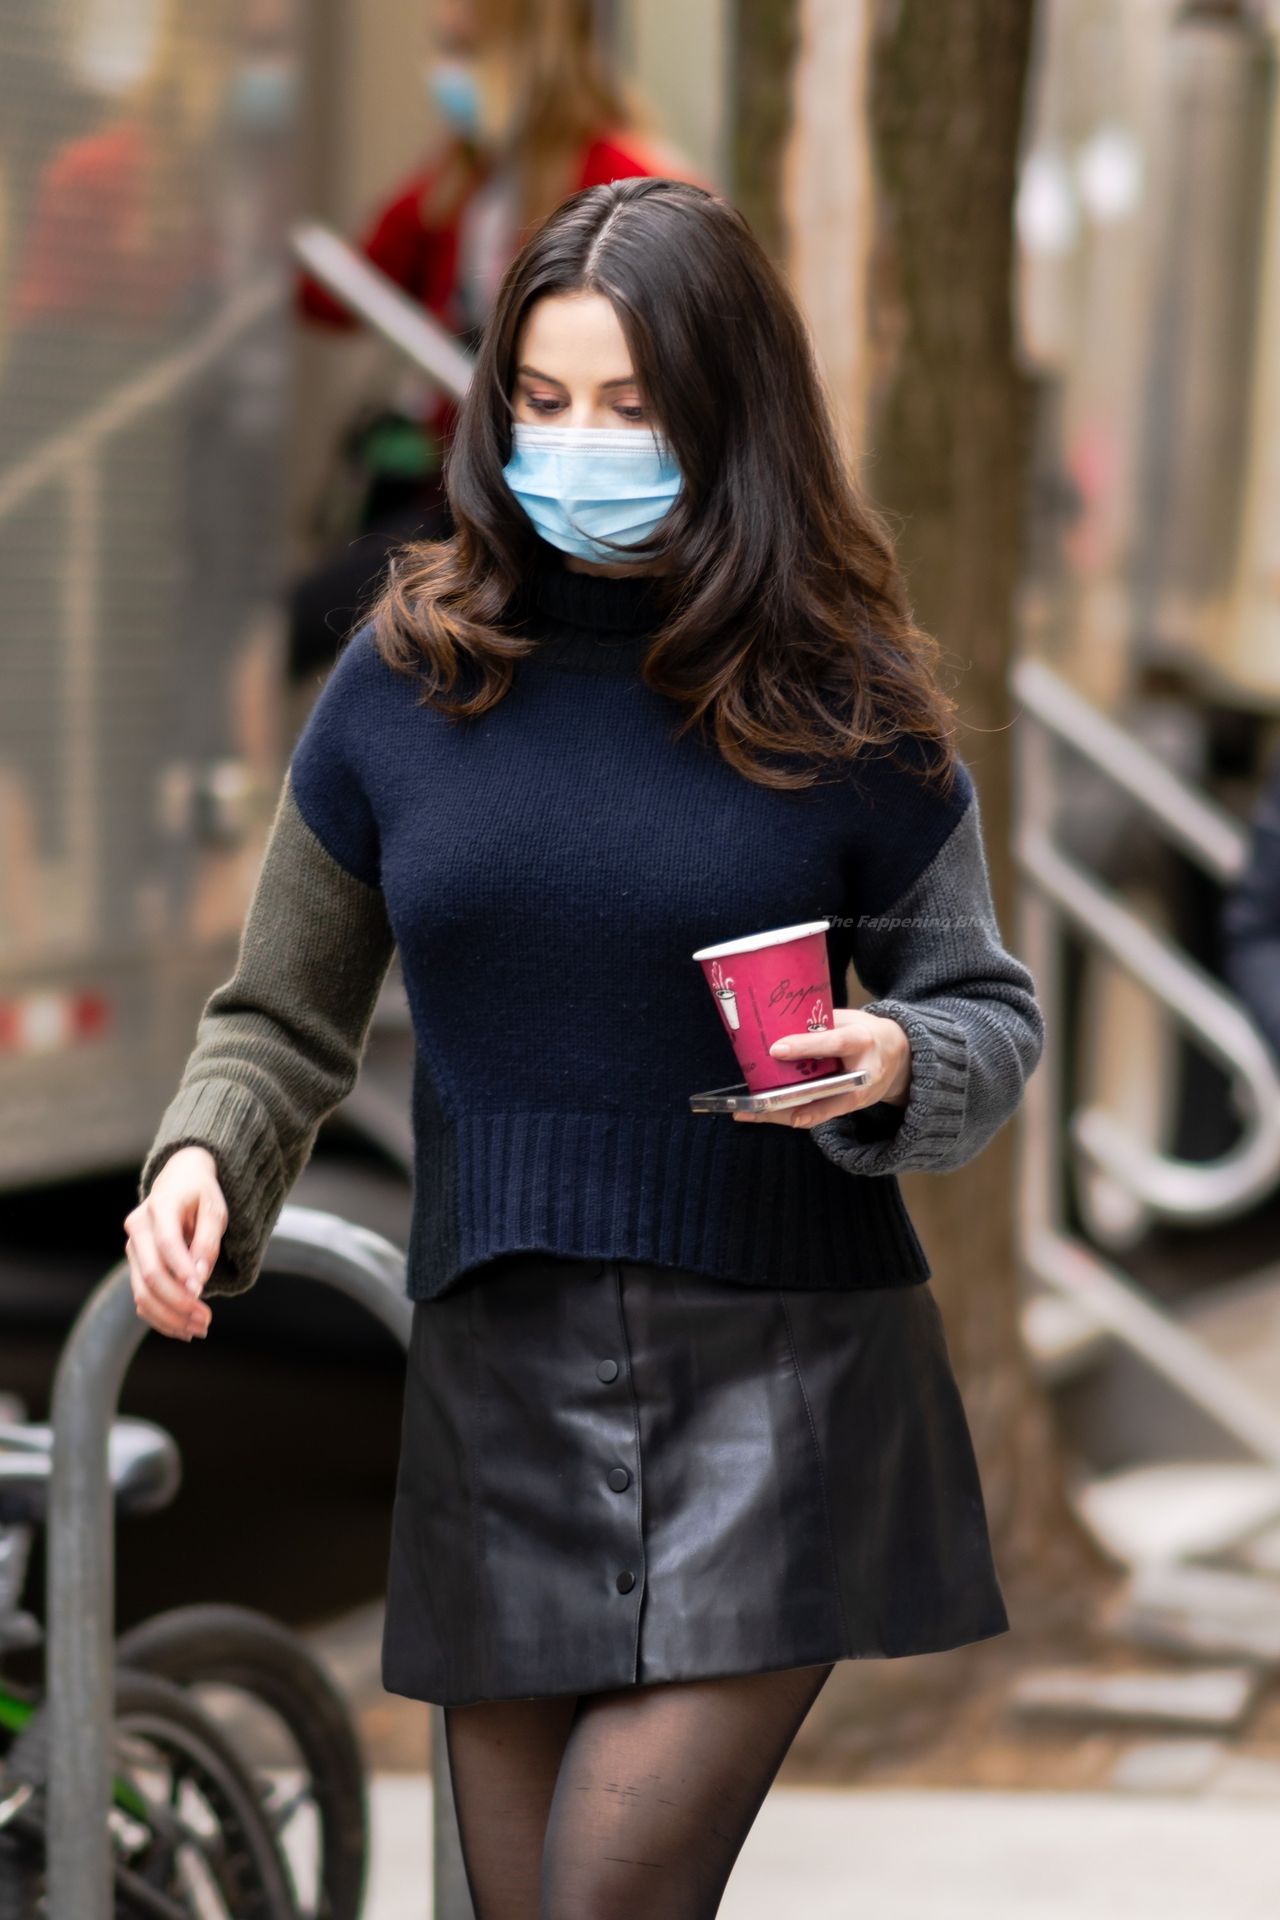 Selena Gomez is Pictured on the Set of Only Murders in the Building in NYC (16 Photos)